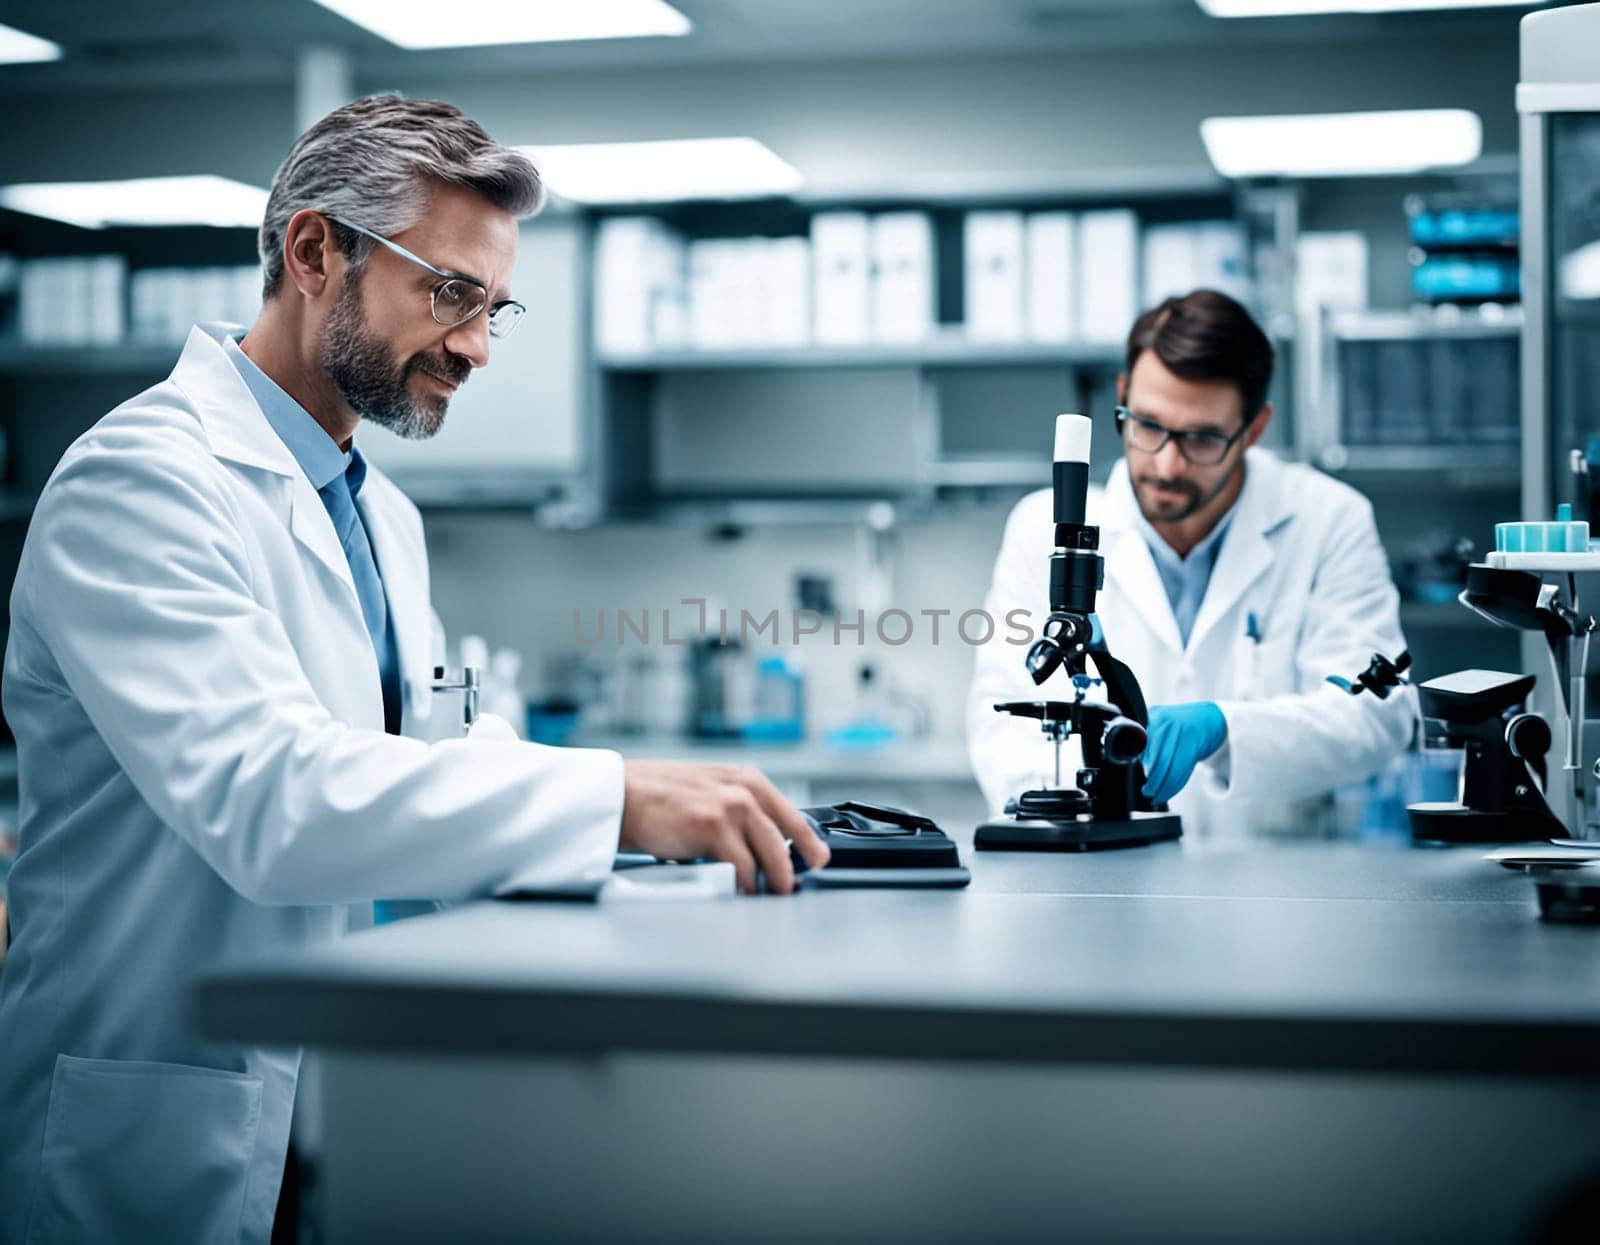 Laboratory scientific and medical research. Doctors and scientists conduct experiments and experiments. High quality illustration